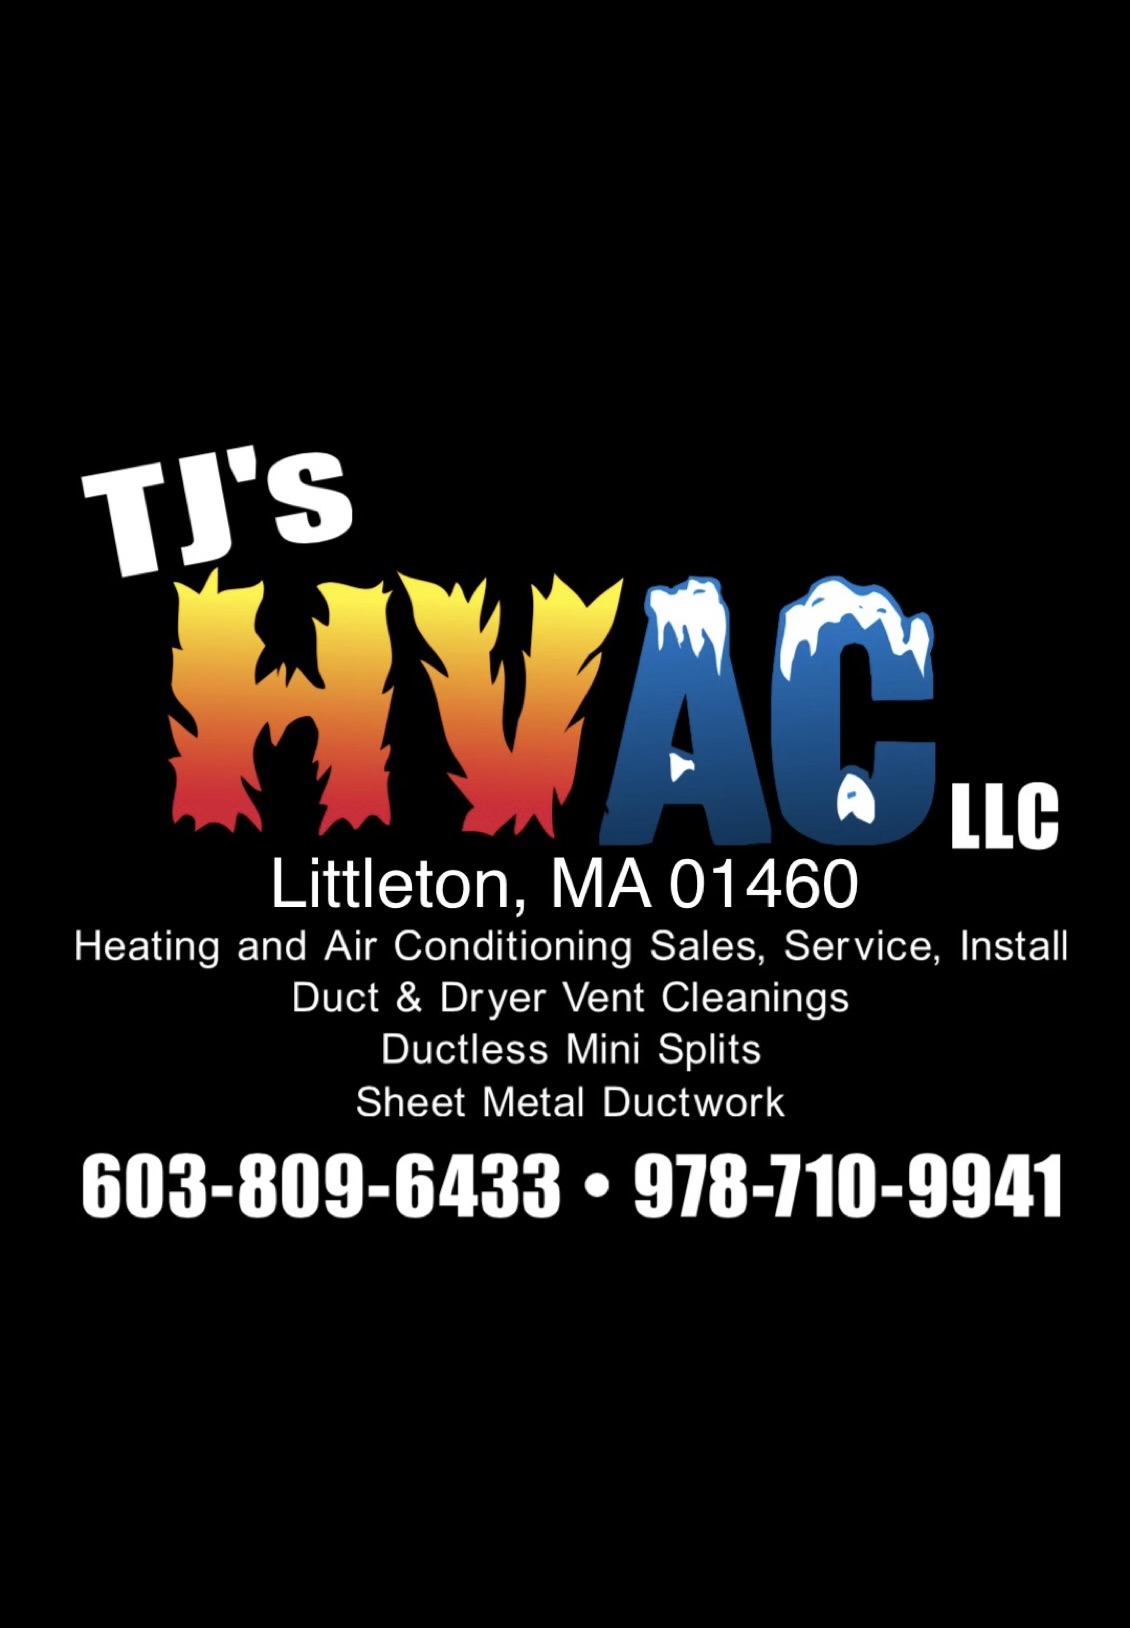 TJ's Heating and Air Conditioning Logo